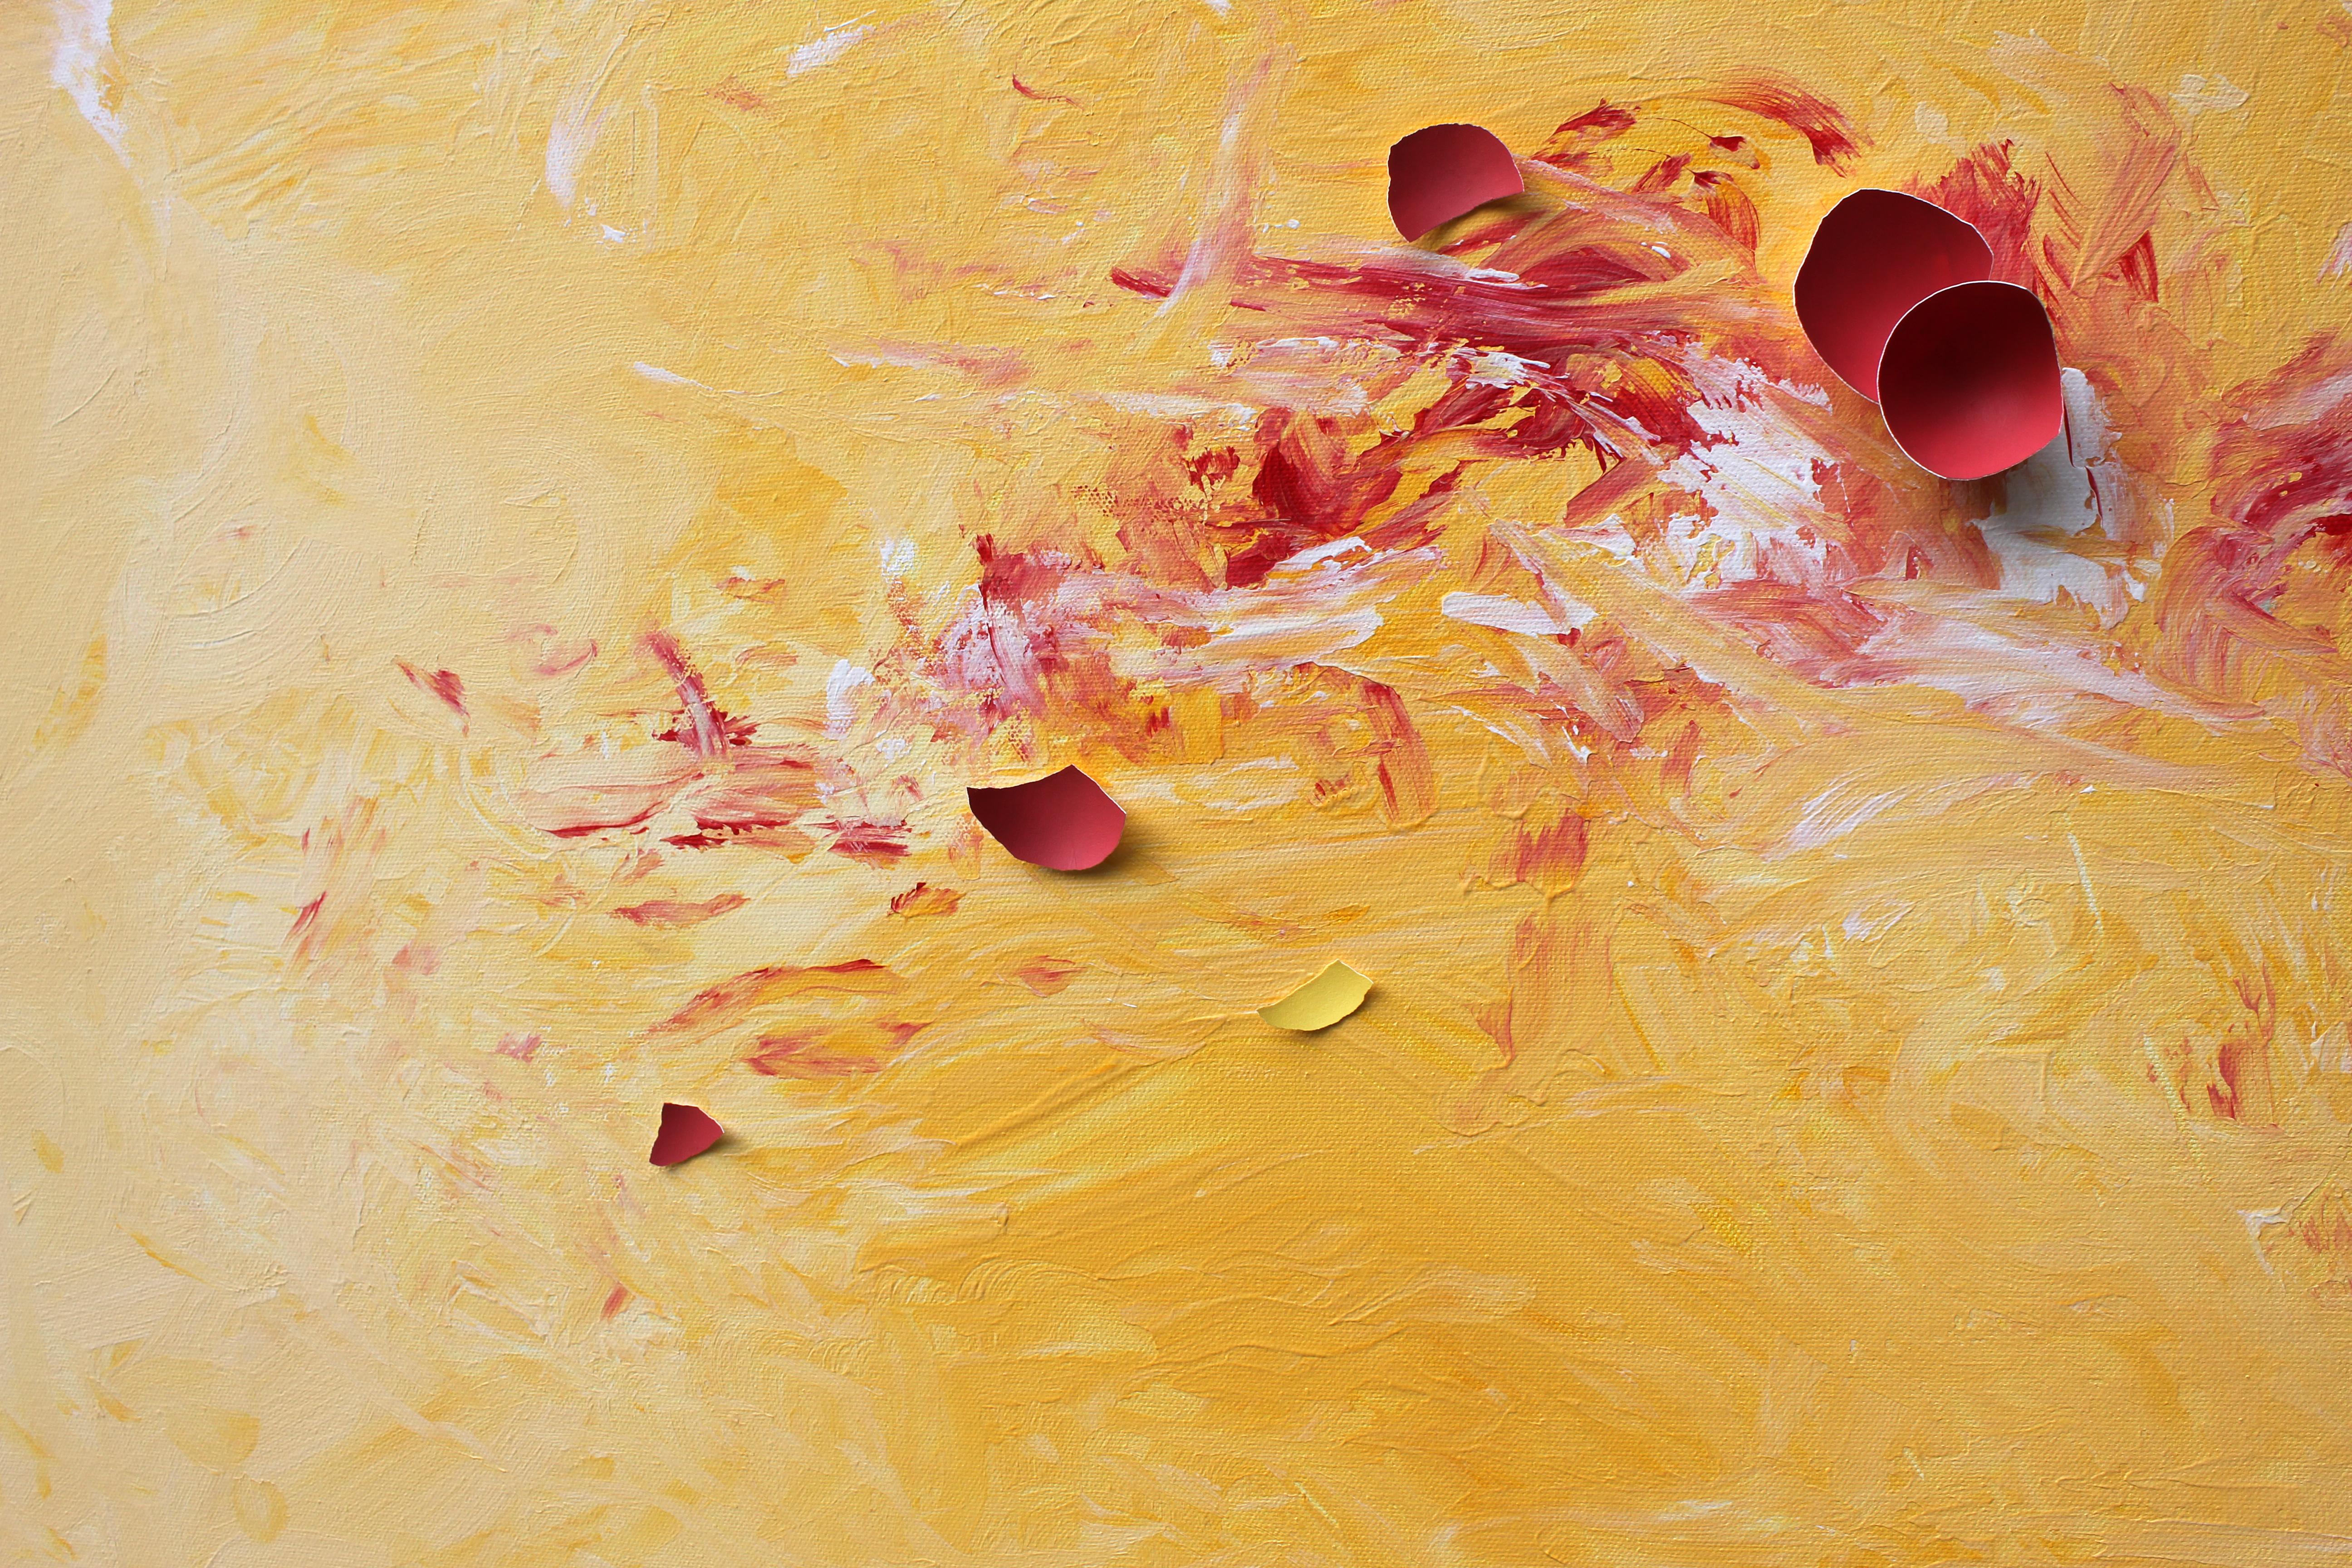 In the Light  - Orange Abstract Painting by Larisa Safaryan